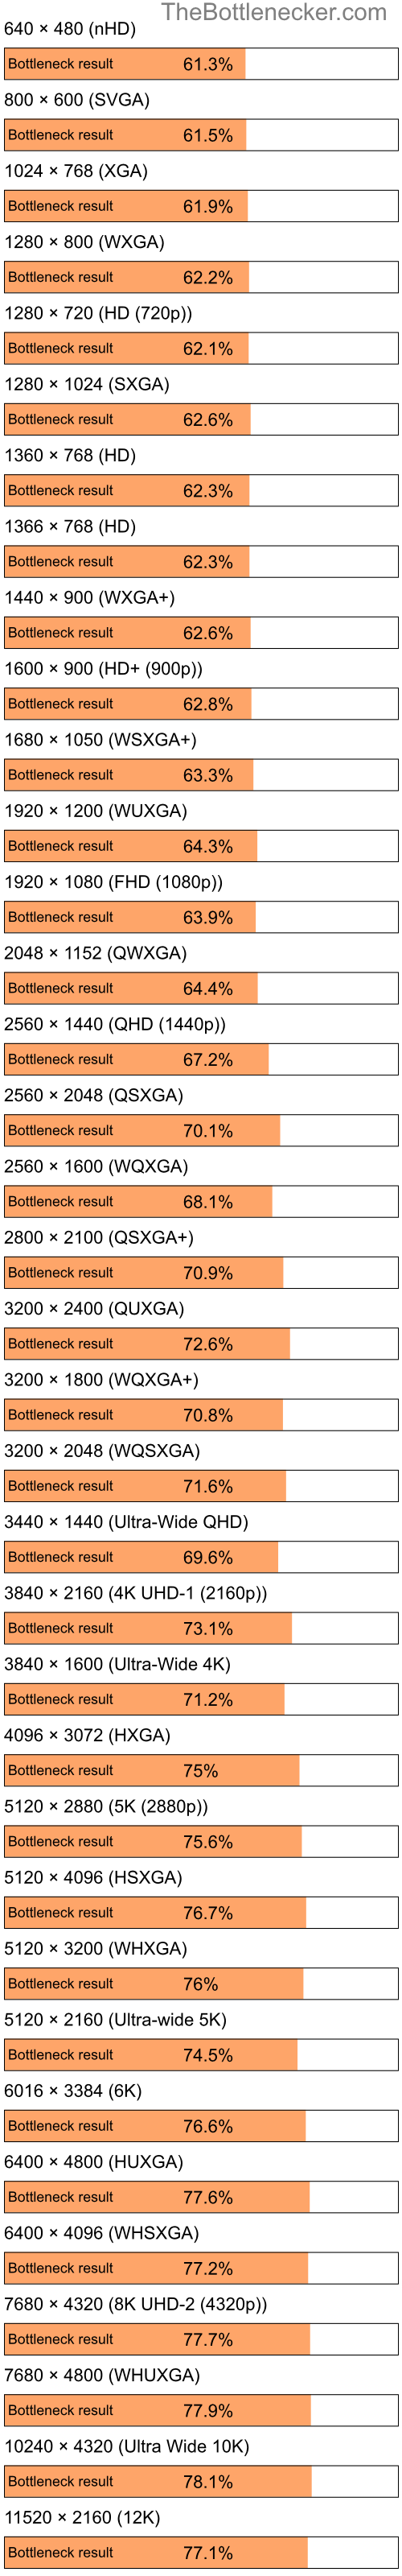 Bottleneck results by resolution for Intel Atom Z520 and NVIDIA GeForce 210 in7 Days to Die